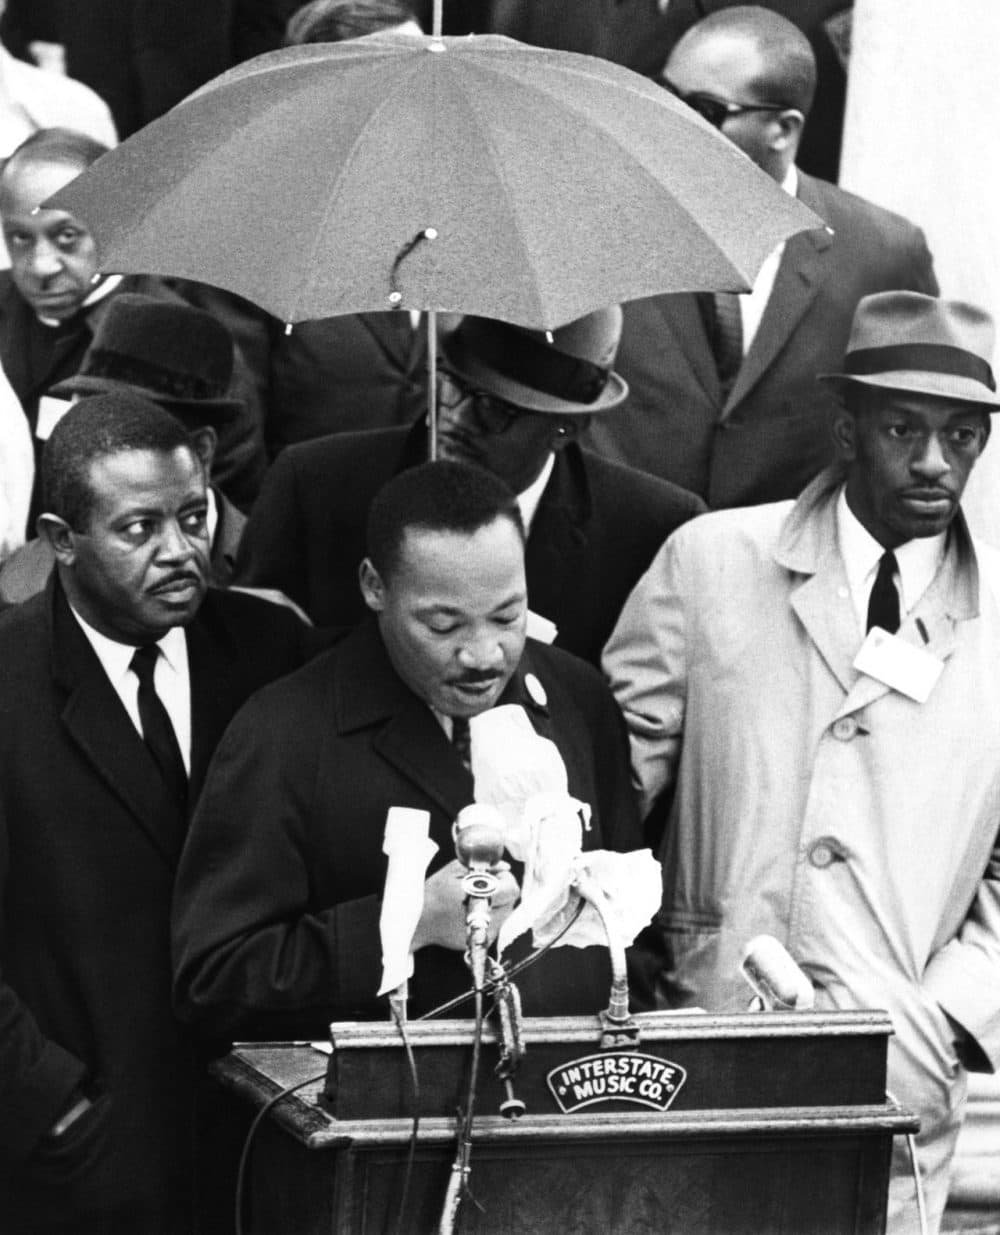 Dr. Martin Luther King Jr., protected by umbrella from rain, speaks to crowd on historic Boston Common, April 23, 1965. King led a civil rights march from the Roxbury section to the Common. He came to Boston, to lead the demonstration to protest segregation in schools, jobs and housing. (AP)